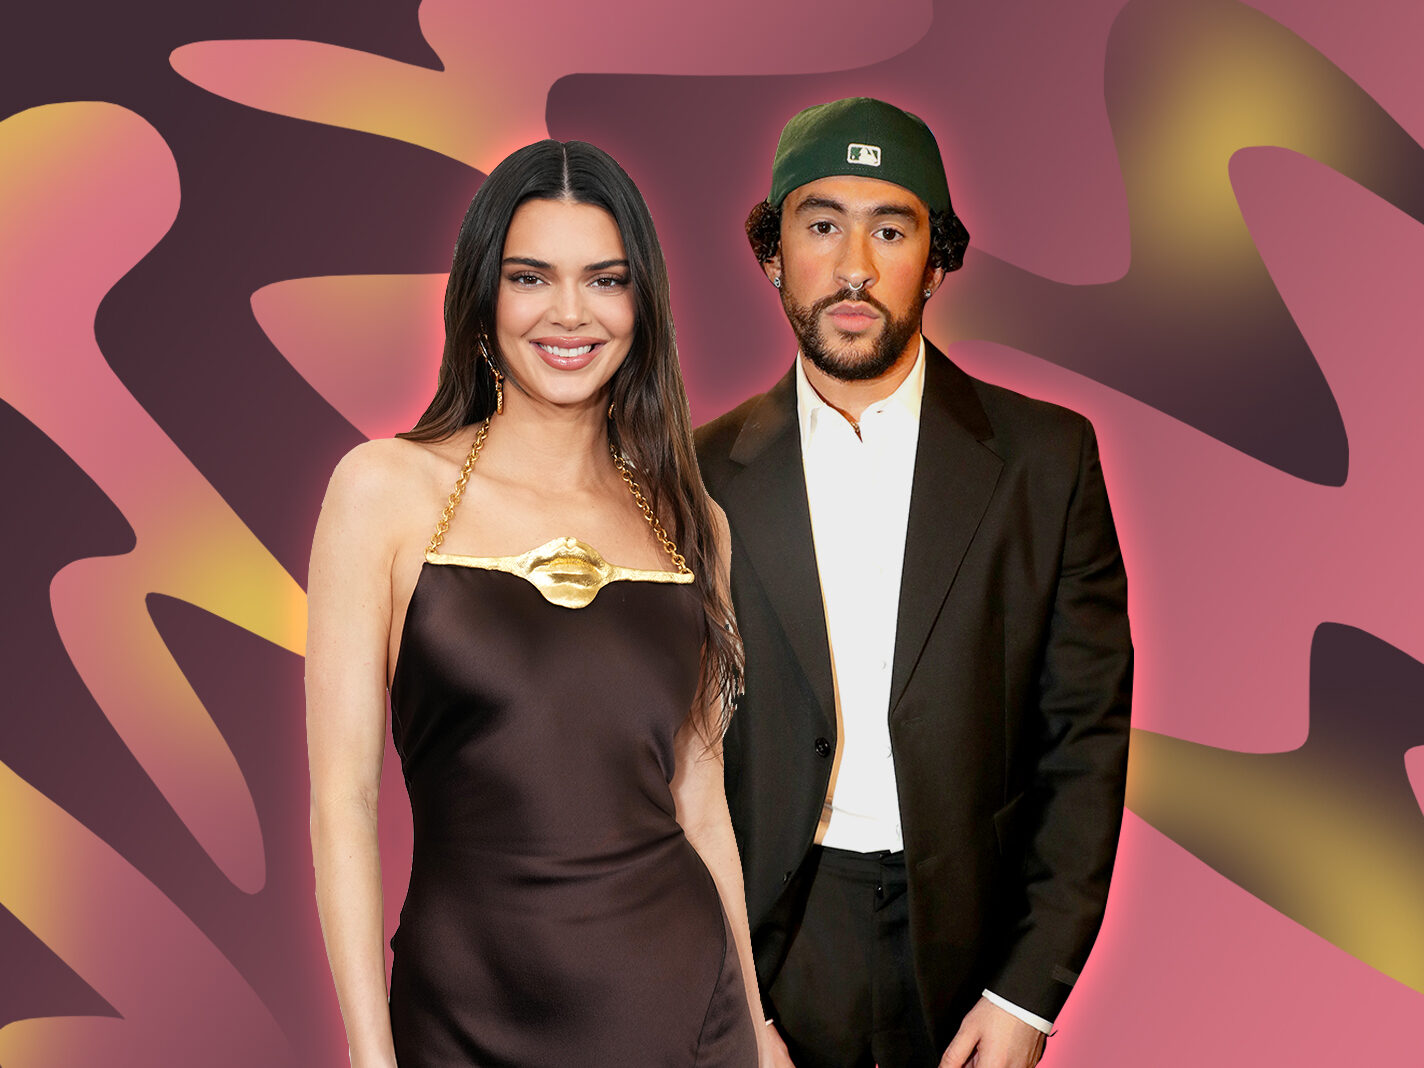 I will fight to not have to say goodbye': Kendall Jenner on love after  being spotted making out with Bad Bunny in public